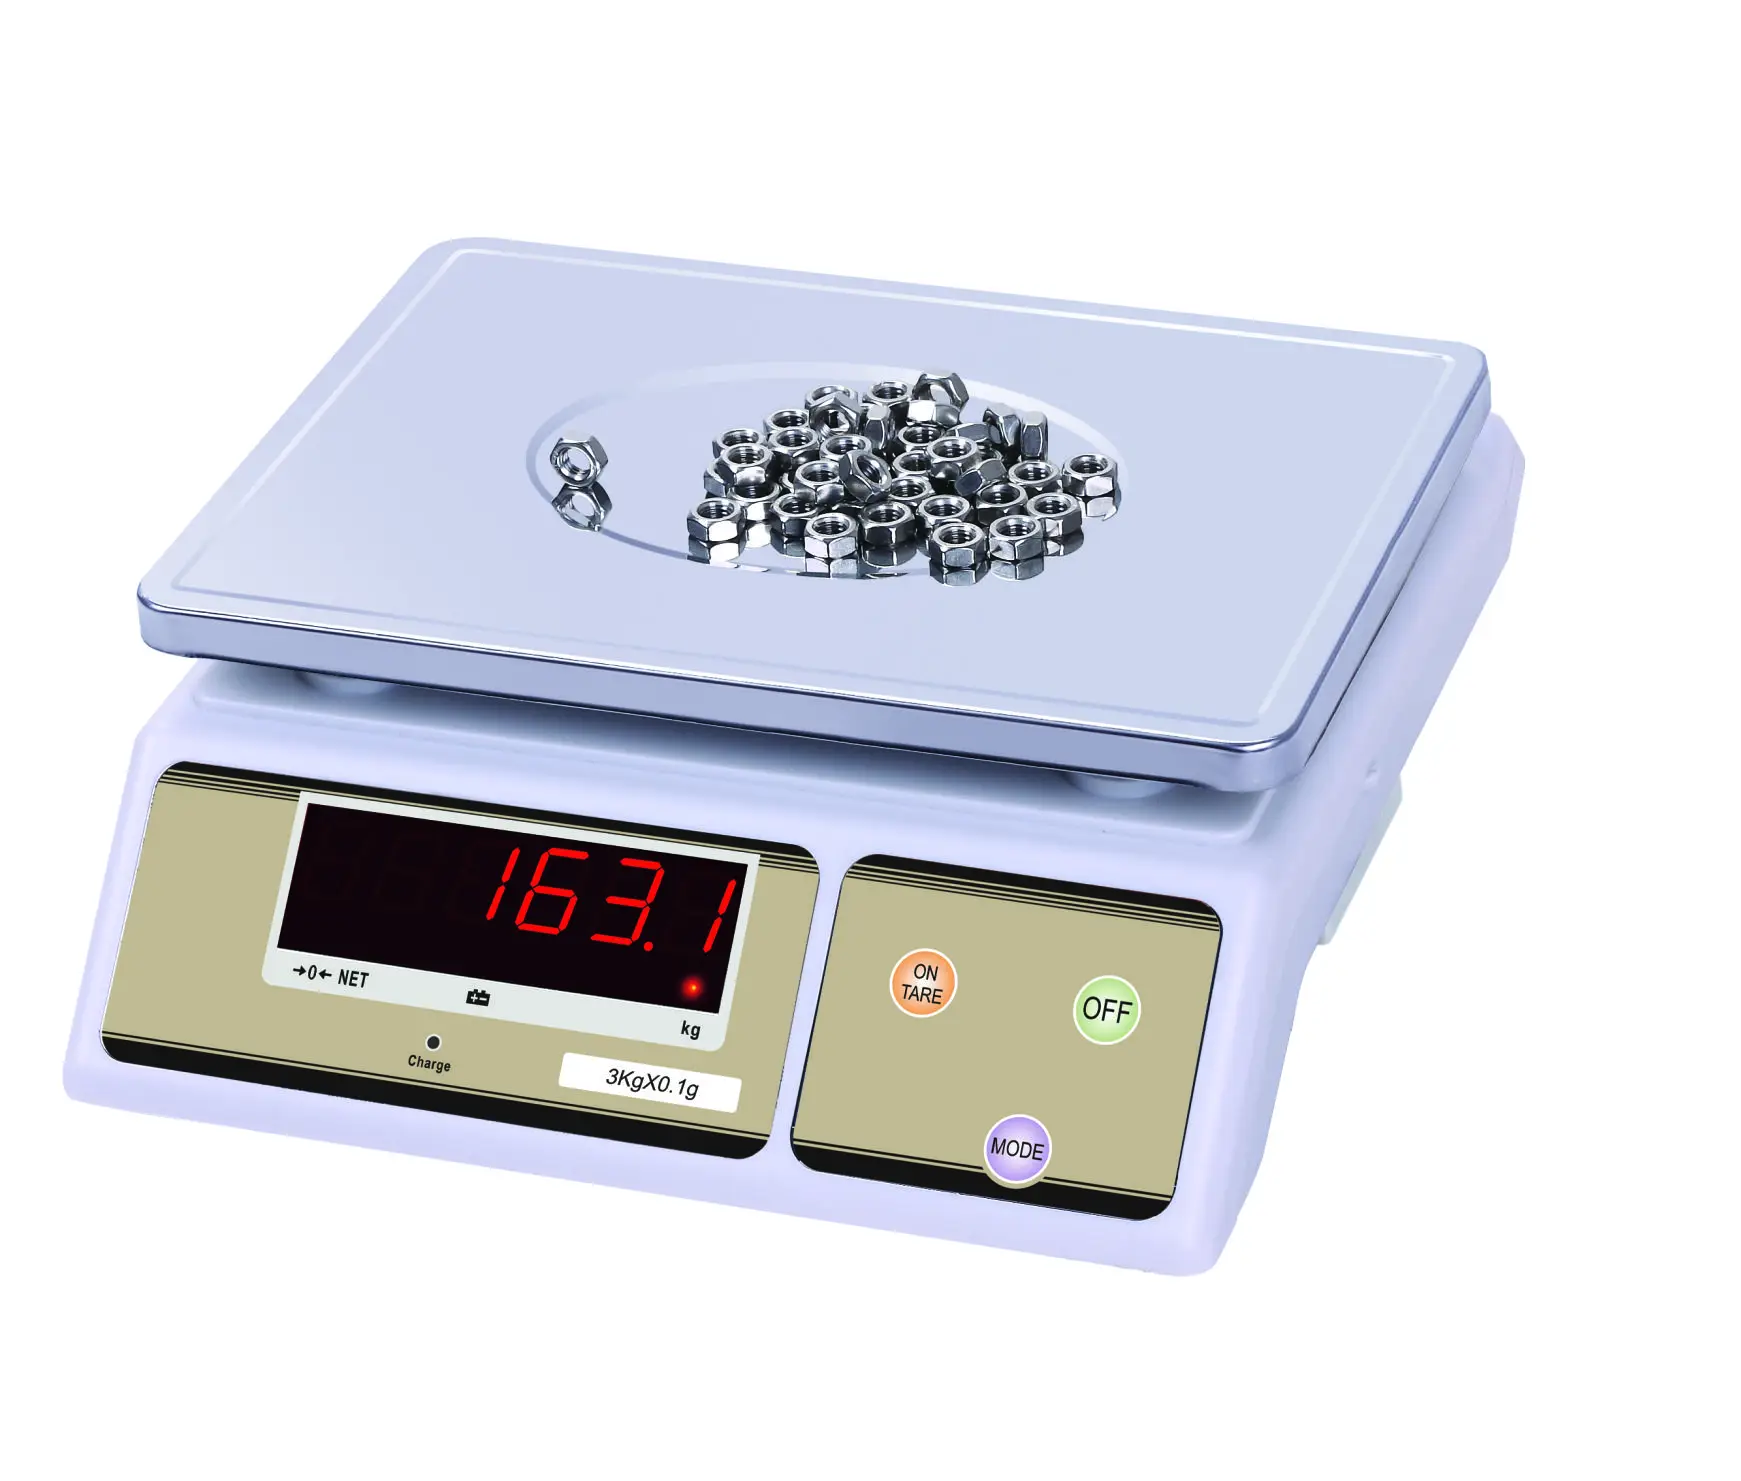 Digital Weighing  Scale kitchen scale3Kg 0.1g 6Kg0.2g 15Kg0.5g 30kg1gFood Scales Digital Weight Gram and Oz Scale with LCD/ Tare portable mini lcd digital electronic pocket scale 600g high accuracy jewelry gold scales kitchen weighing scales